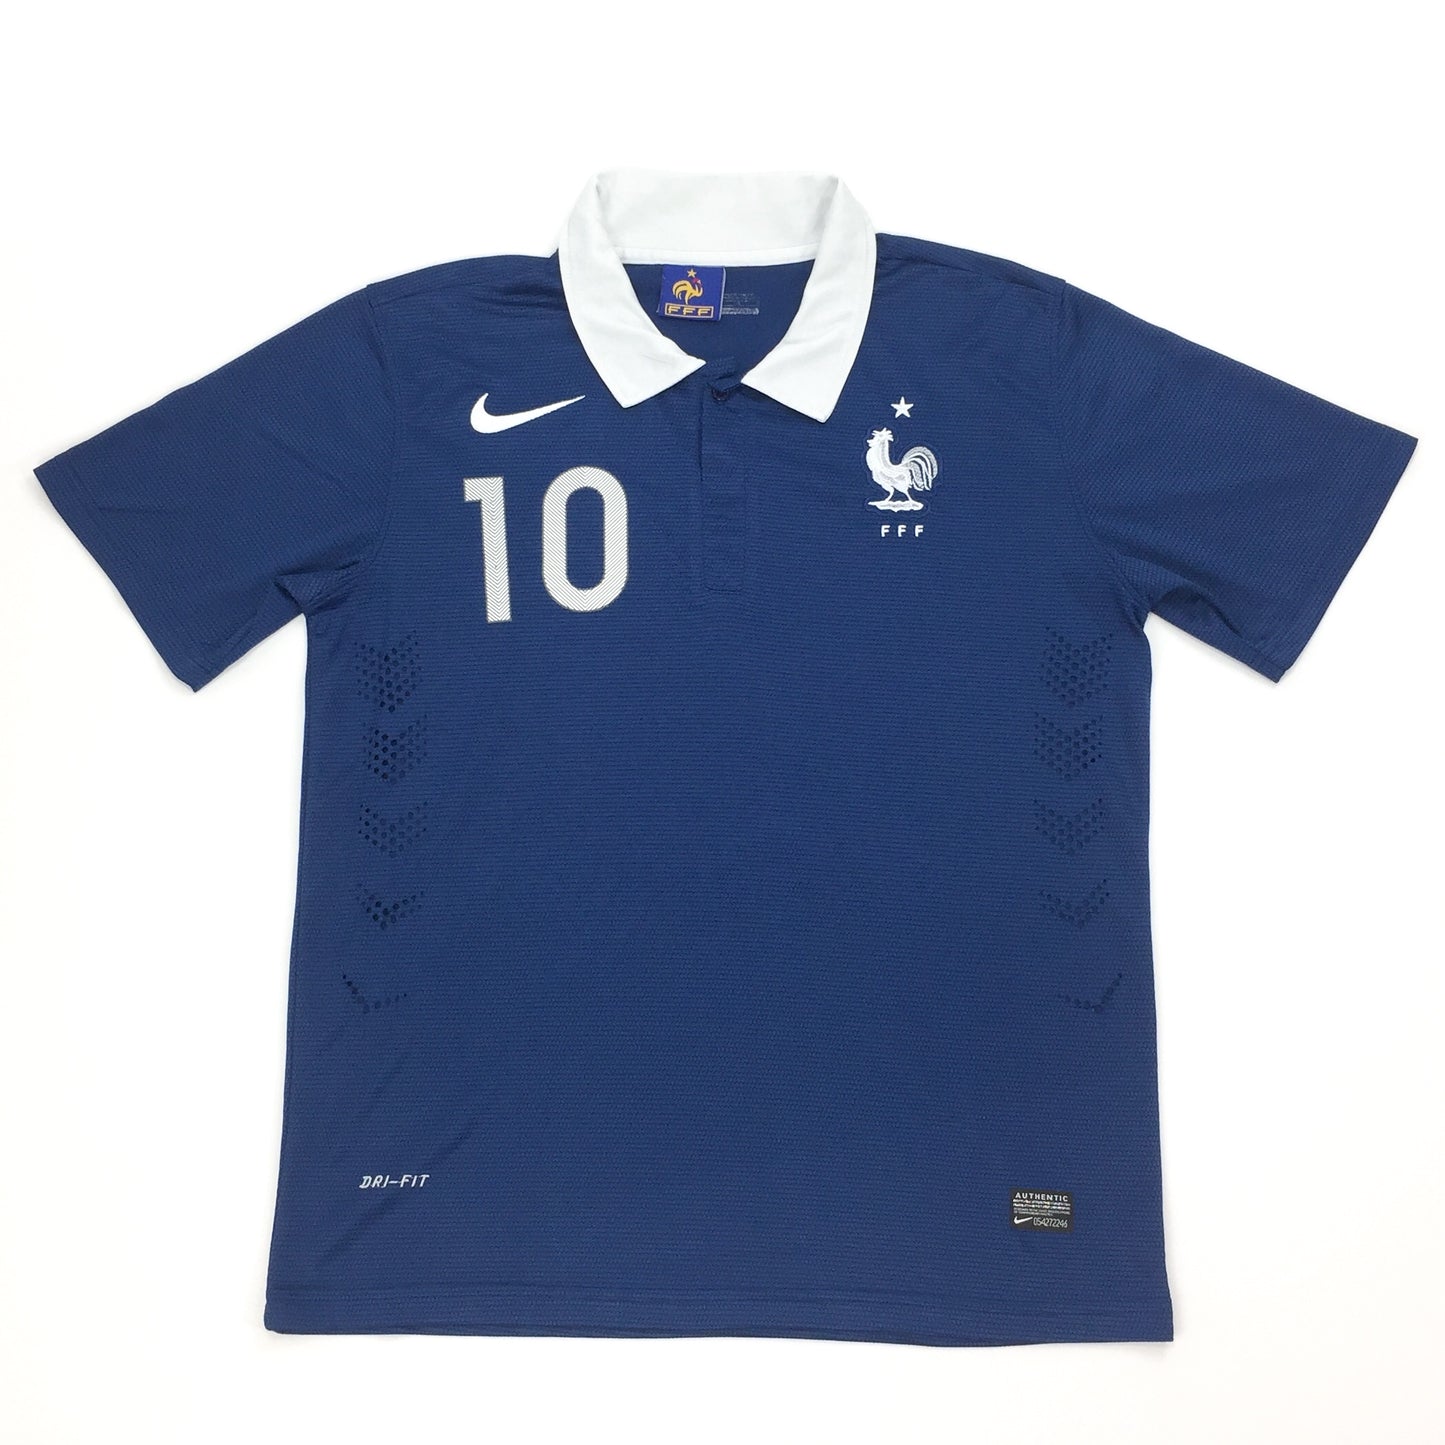 0597 Nike 2014 Benzema French National Soccer Team Jersey